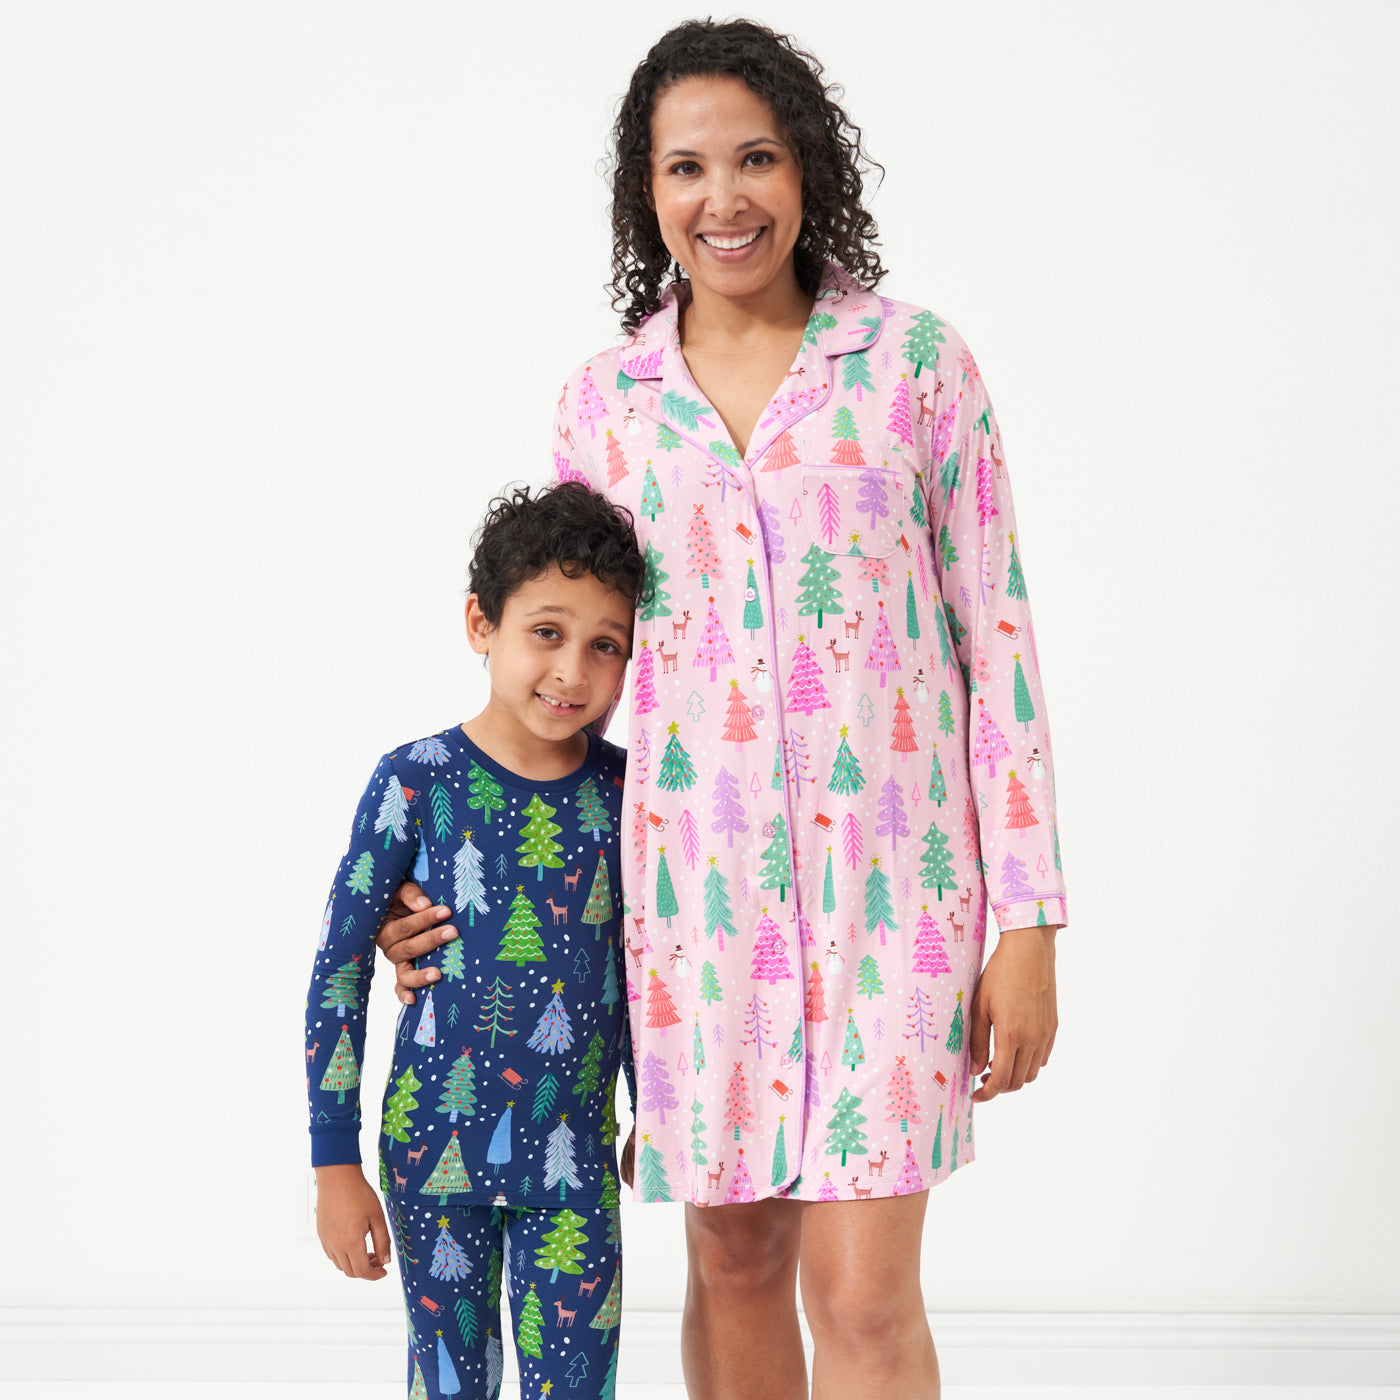 Woman wearing a Pink Merry and Bright women's sleep shirt holding her son's hand. Her son is wearing a coordinating Blue Merry and Bright two piece pajama set